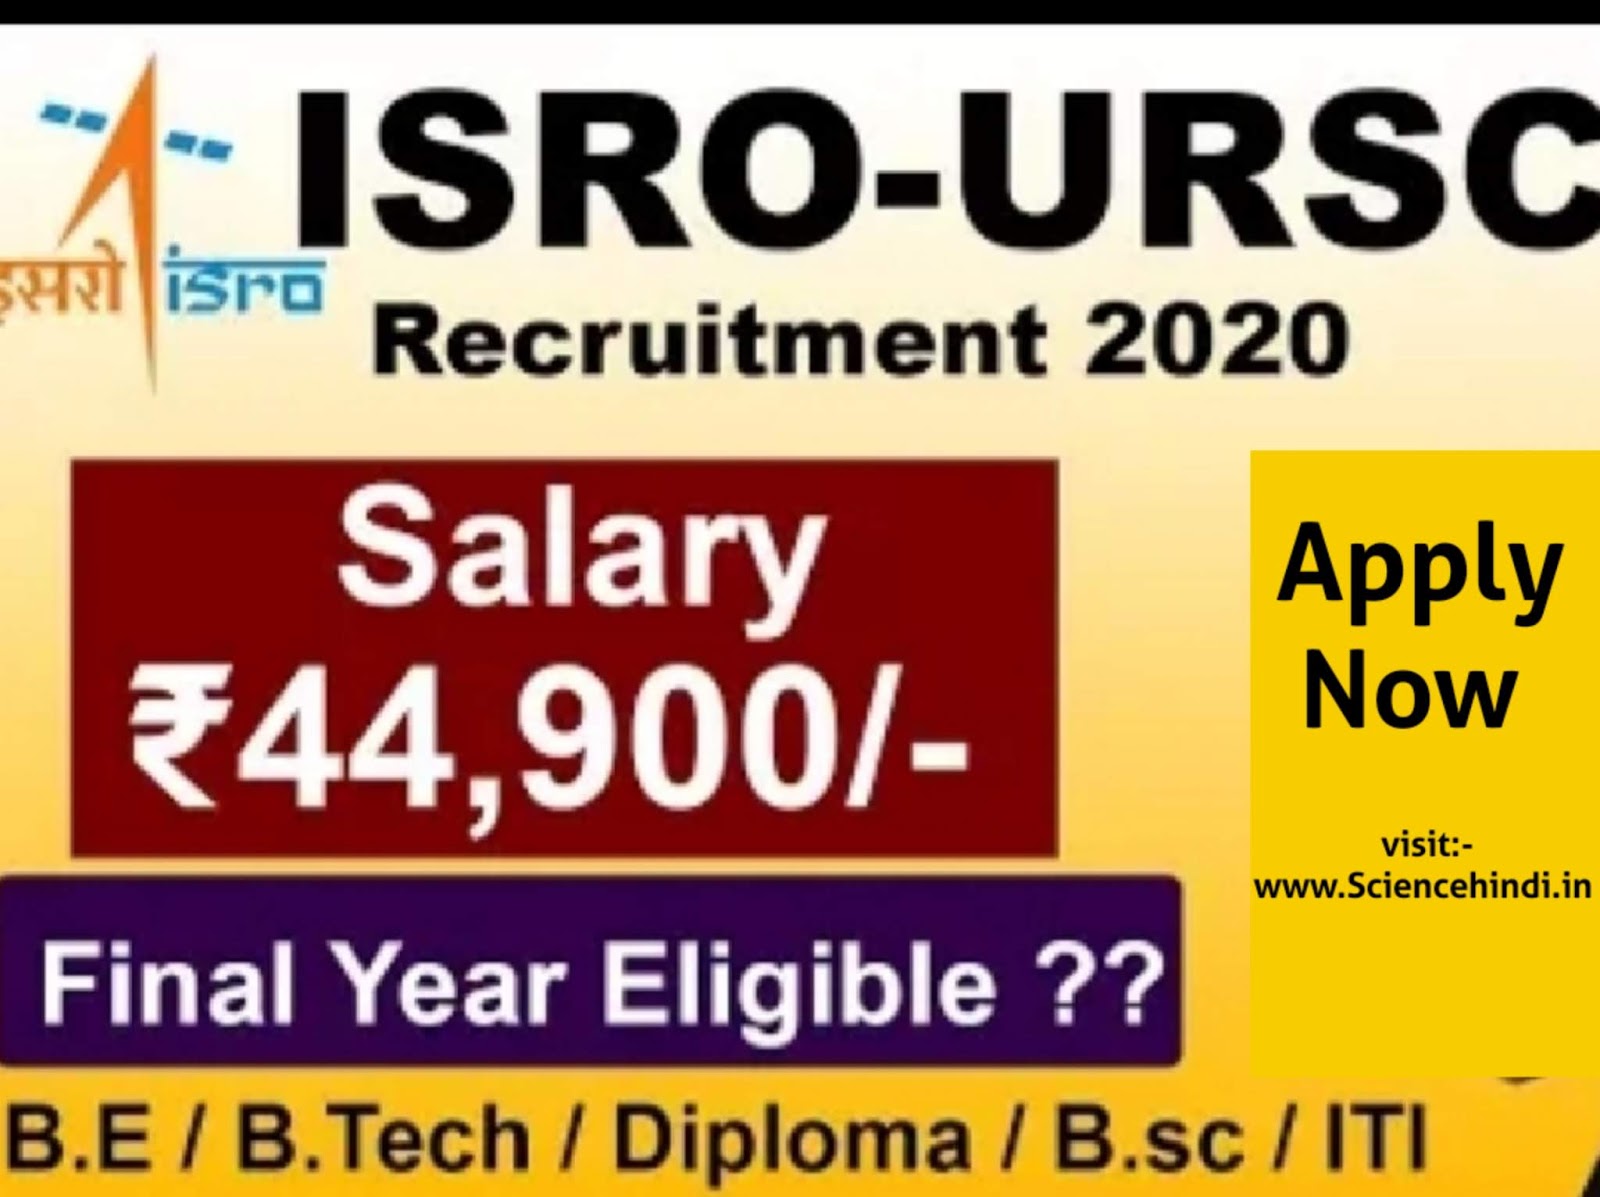 ISRO Recruitment 2020 for Computer science Engineers